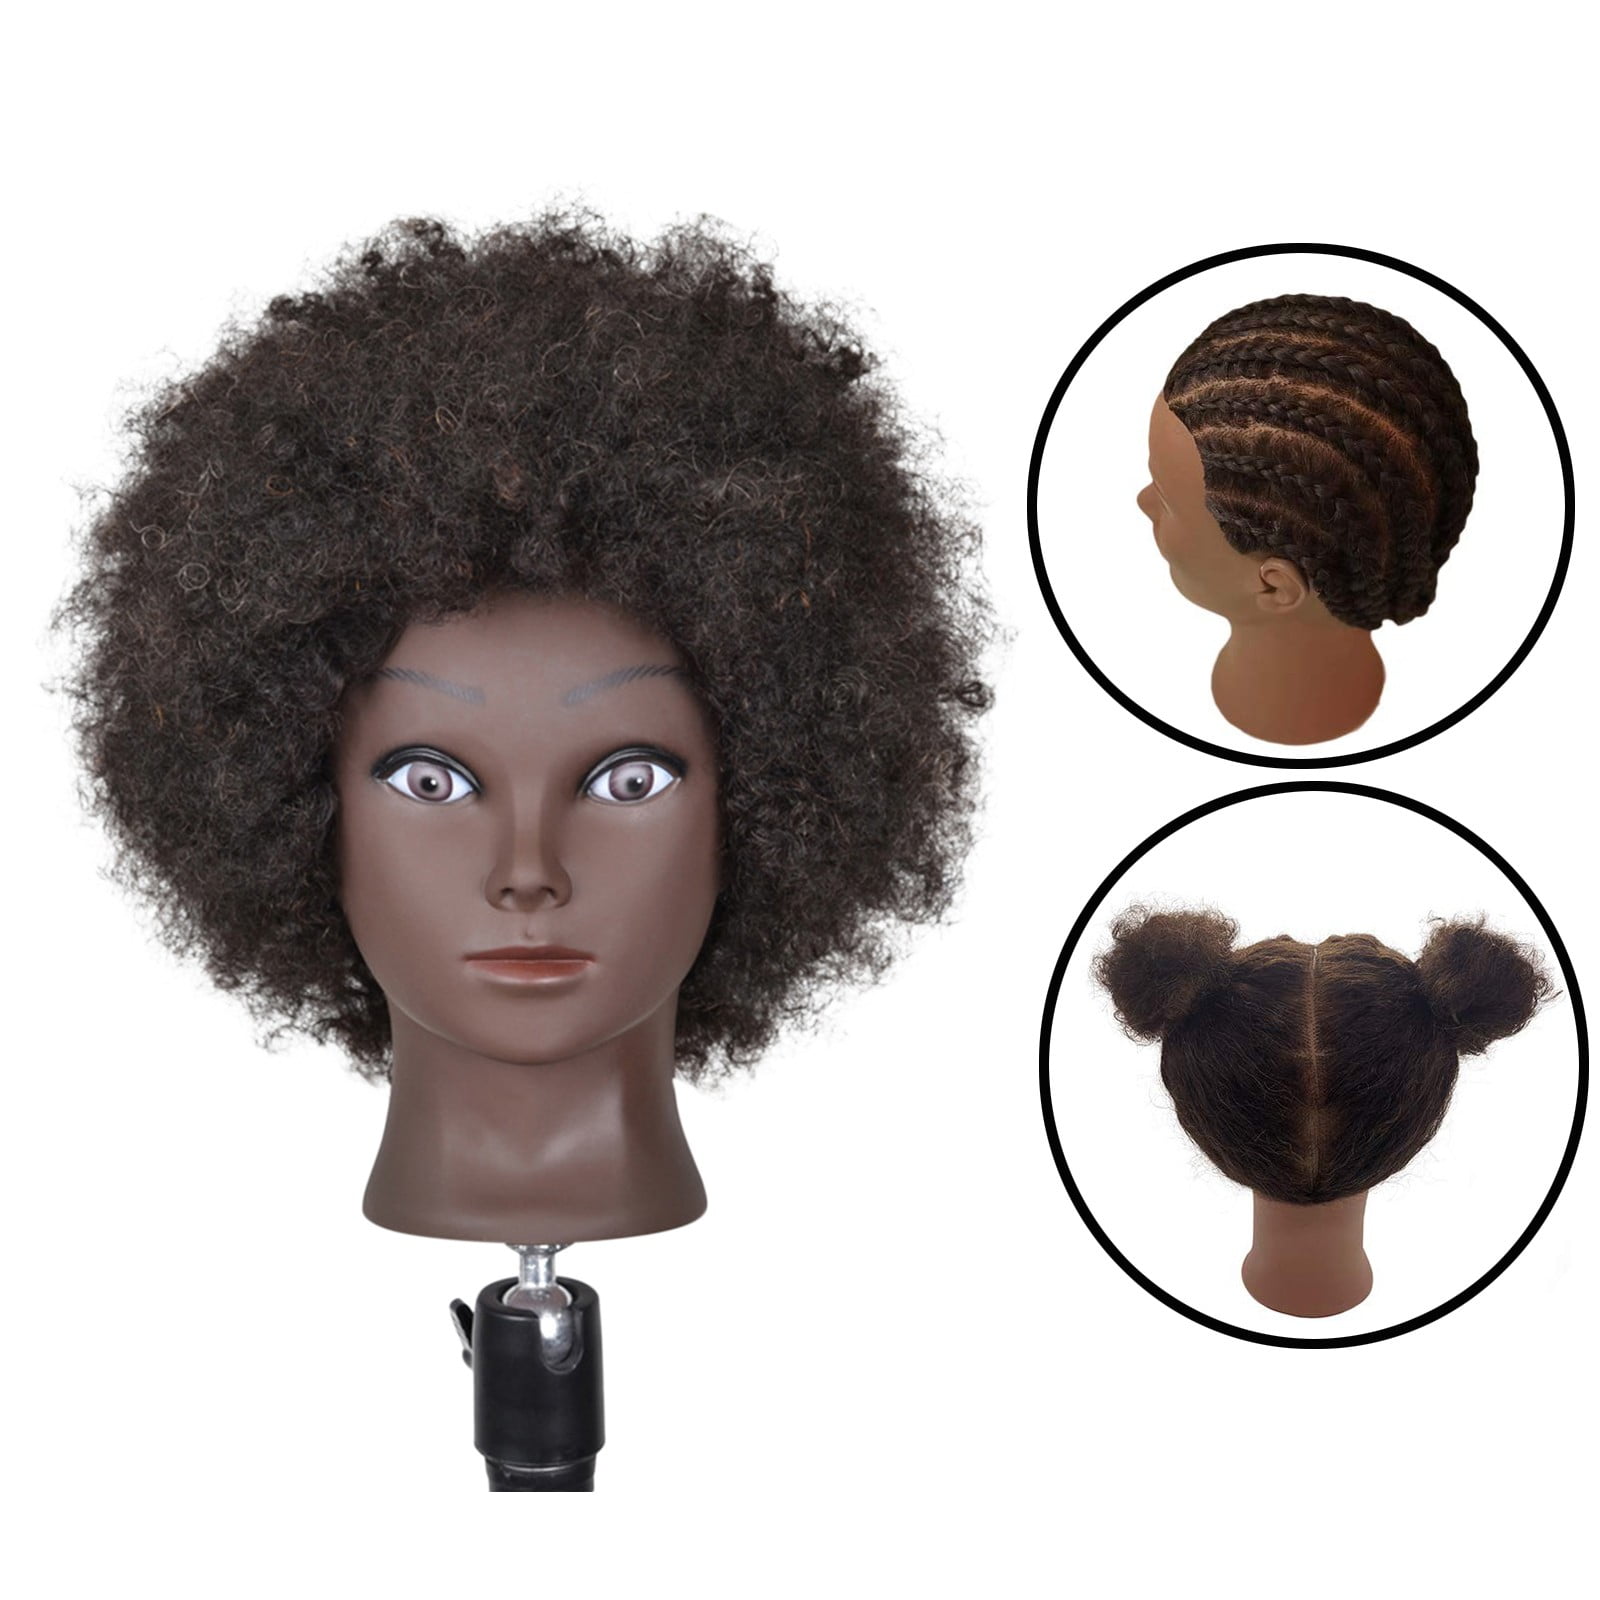 Phamb Afro Mannequin Head for Wigs Black Styrofoam Mannequin Head with Real  Female African American Profile Face Bald Mannequin Head for Making Wigs